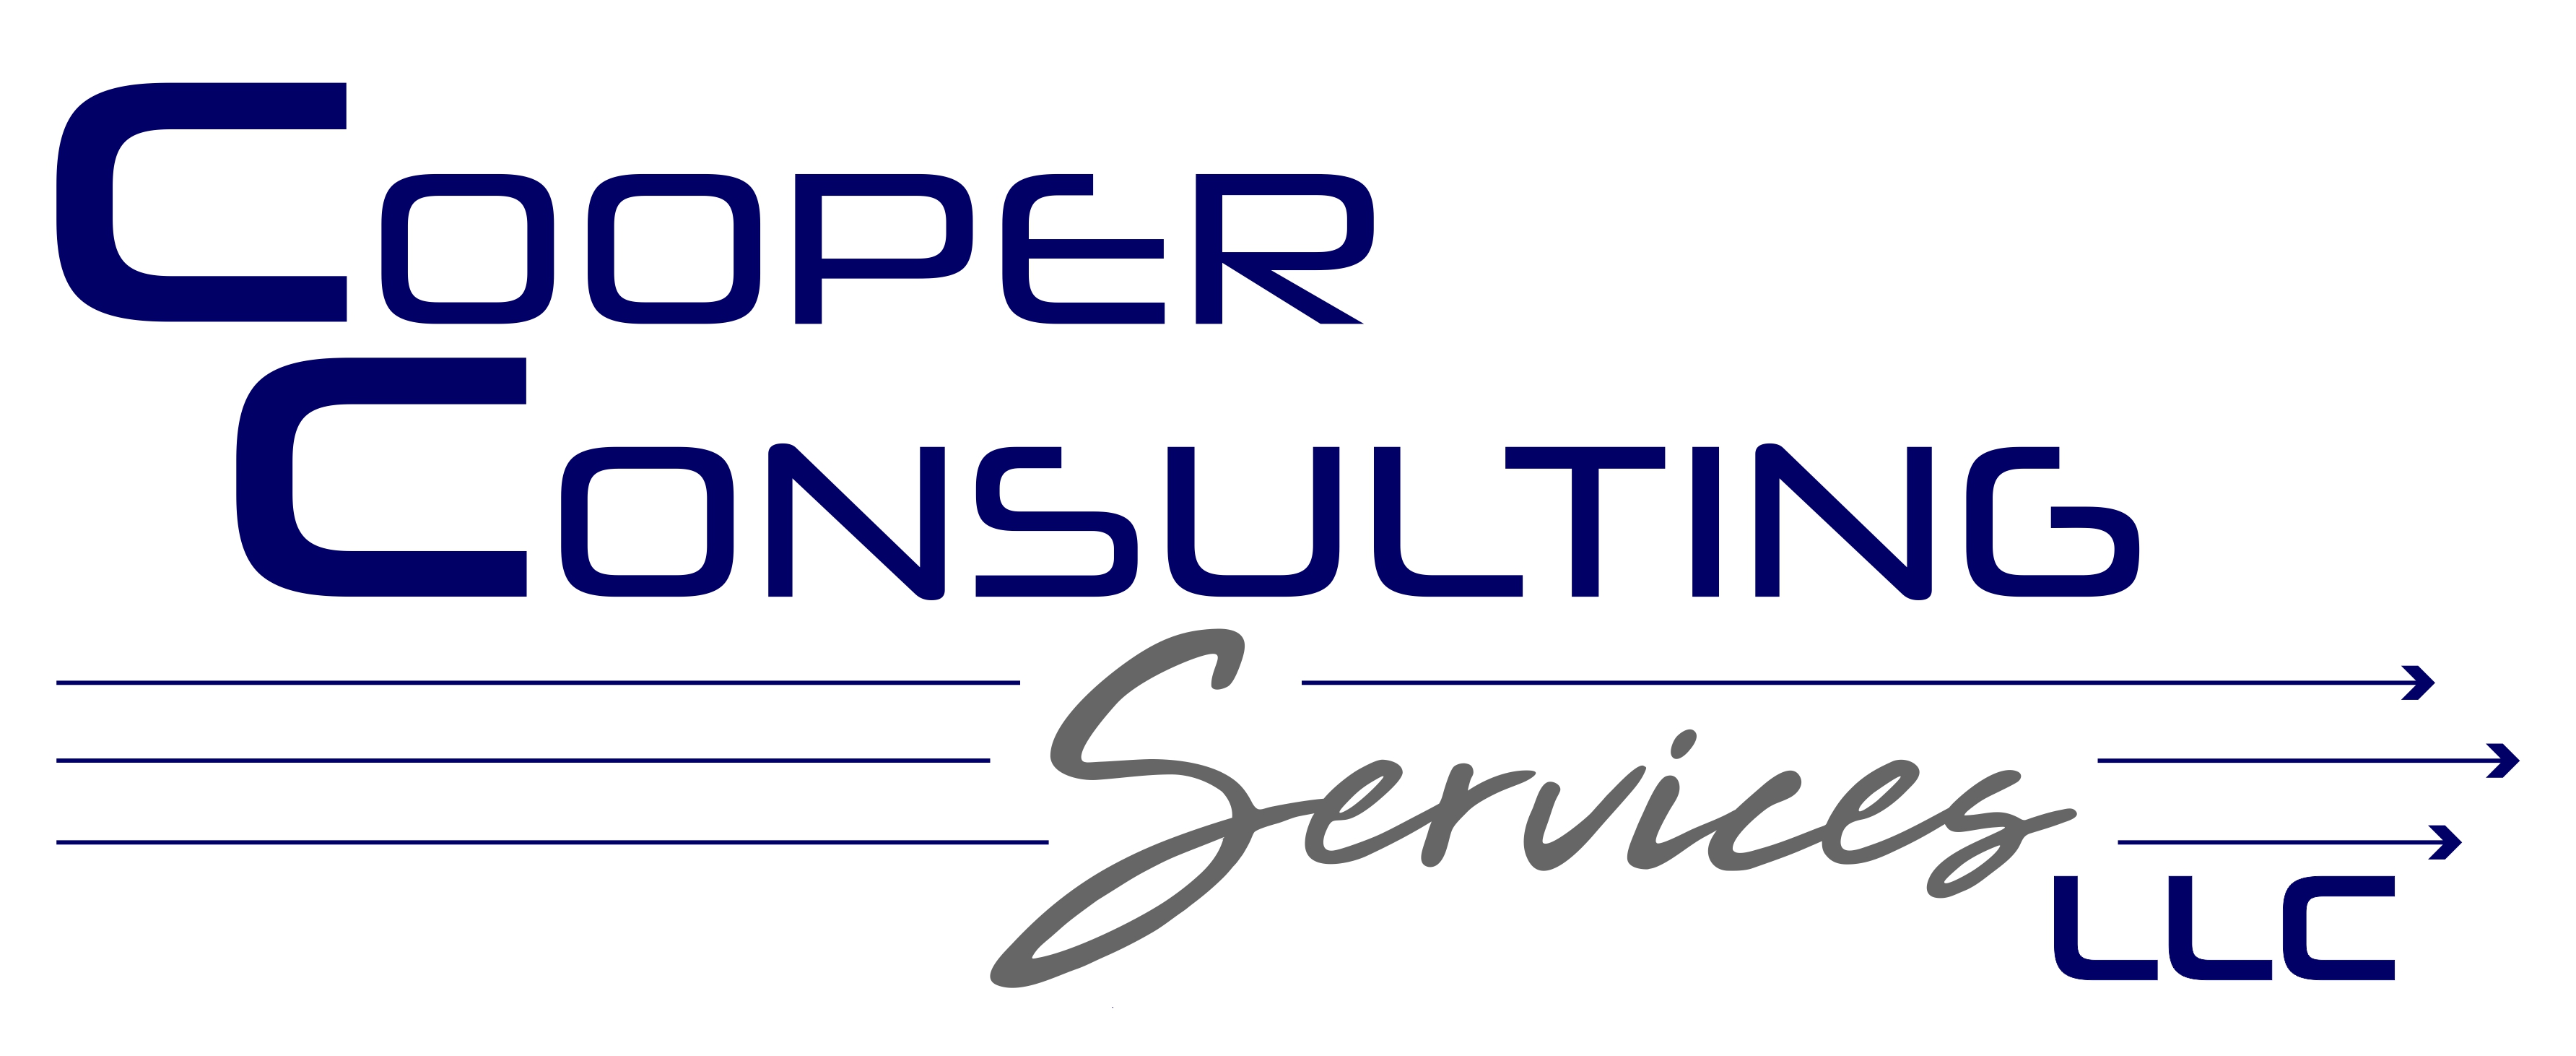 Cooper Consulting Services LLC